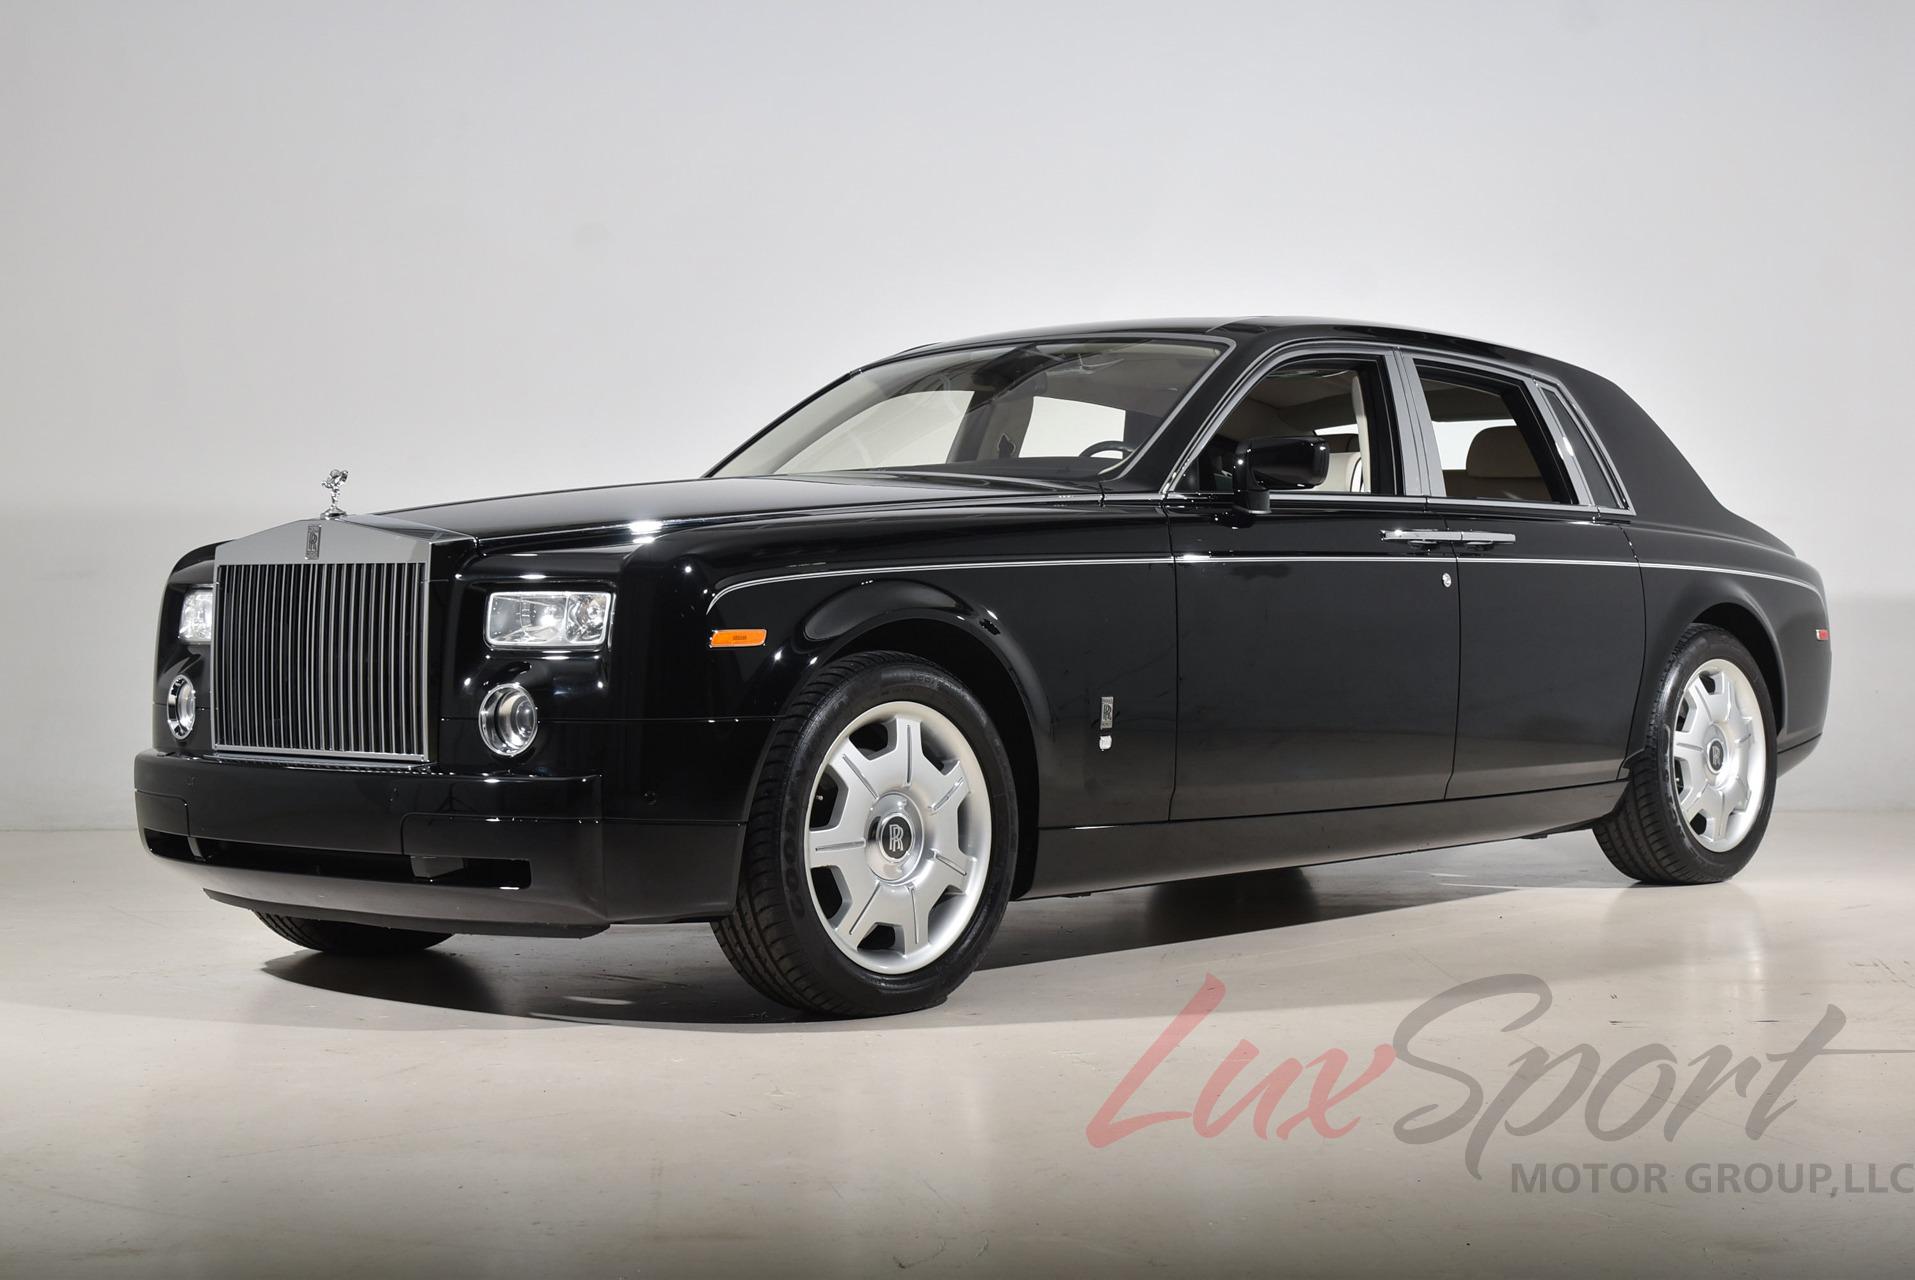 Used RollsRoyce Convertibles for Sale Near Me in New York NY  Autotrader